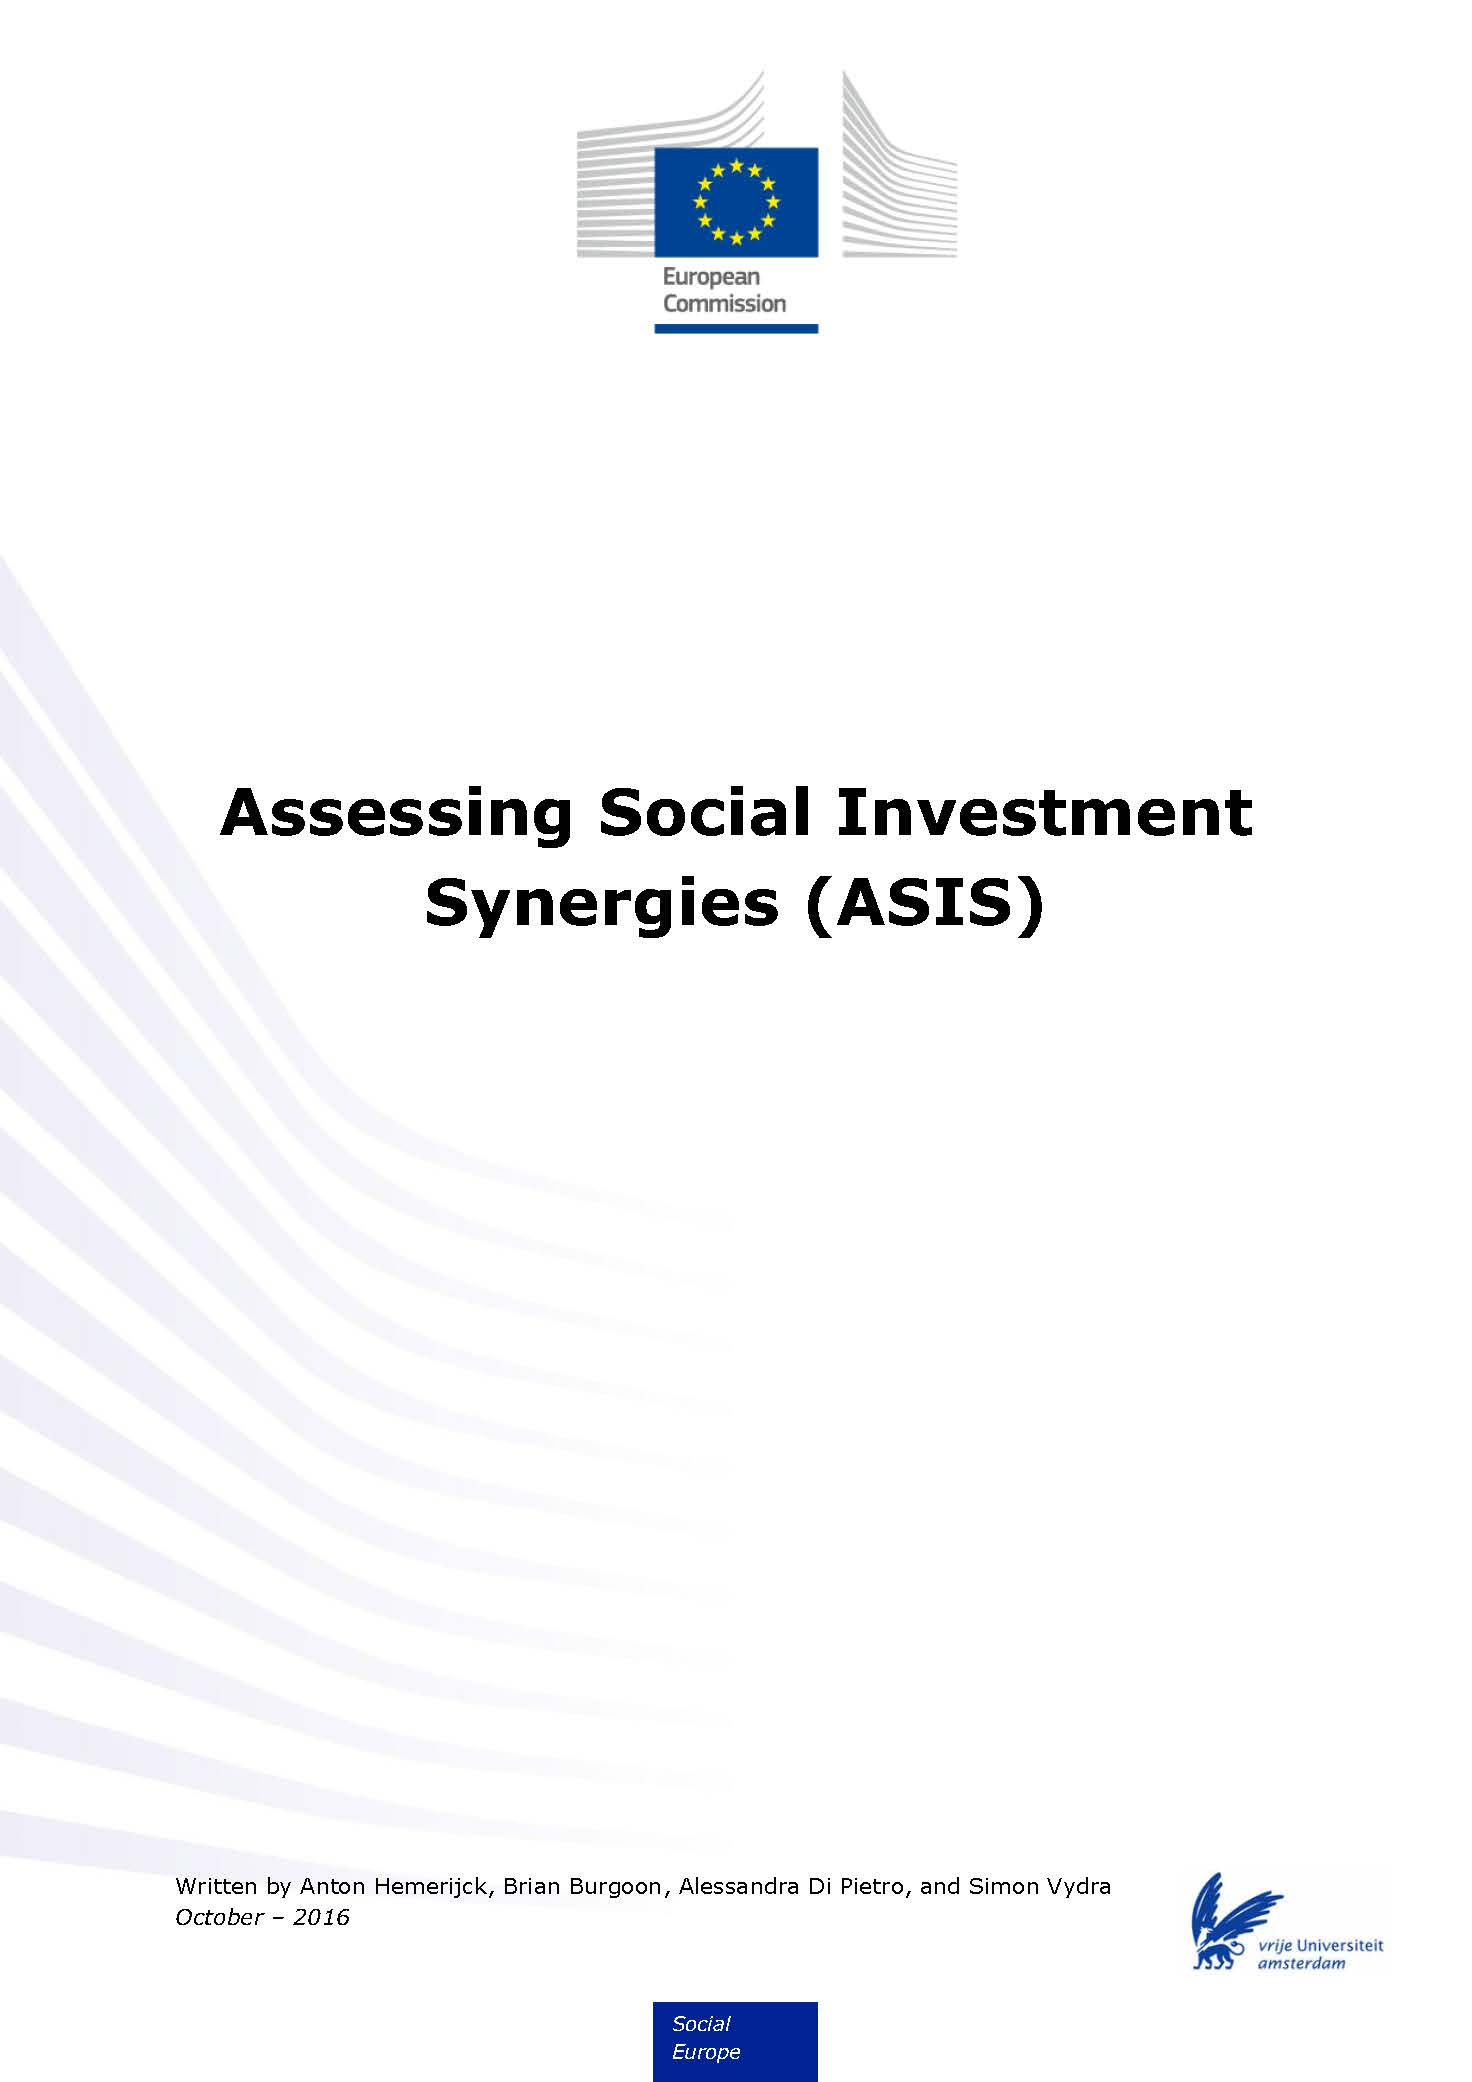 Assessing Social Investment Synergies